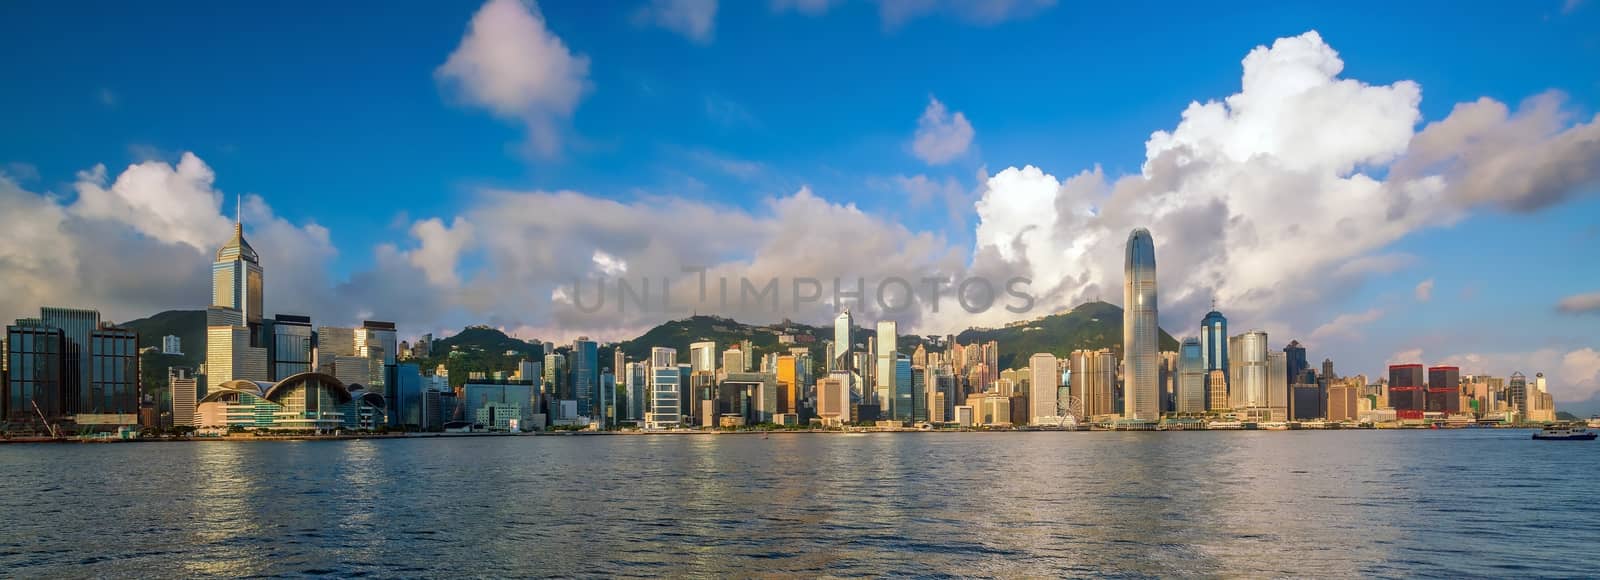 Panoramic view of Victoria Harbor and Hong Kong skyline  by f11photo